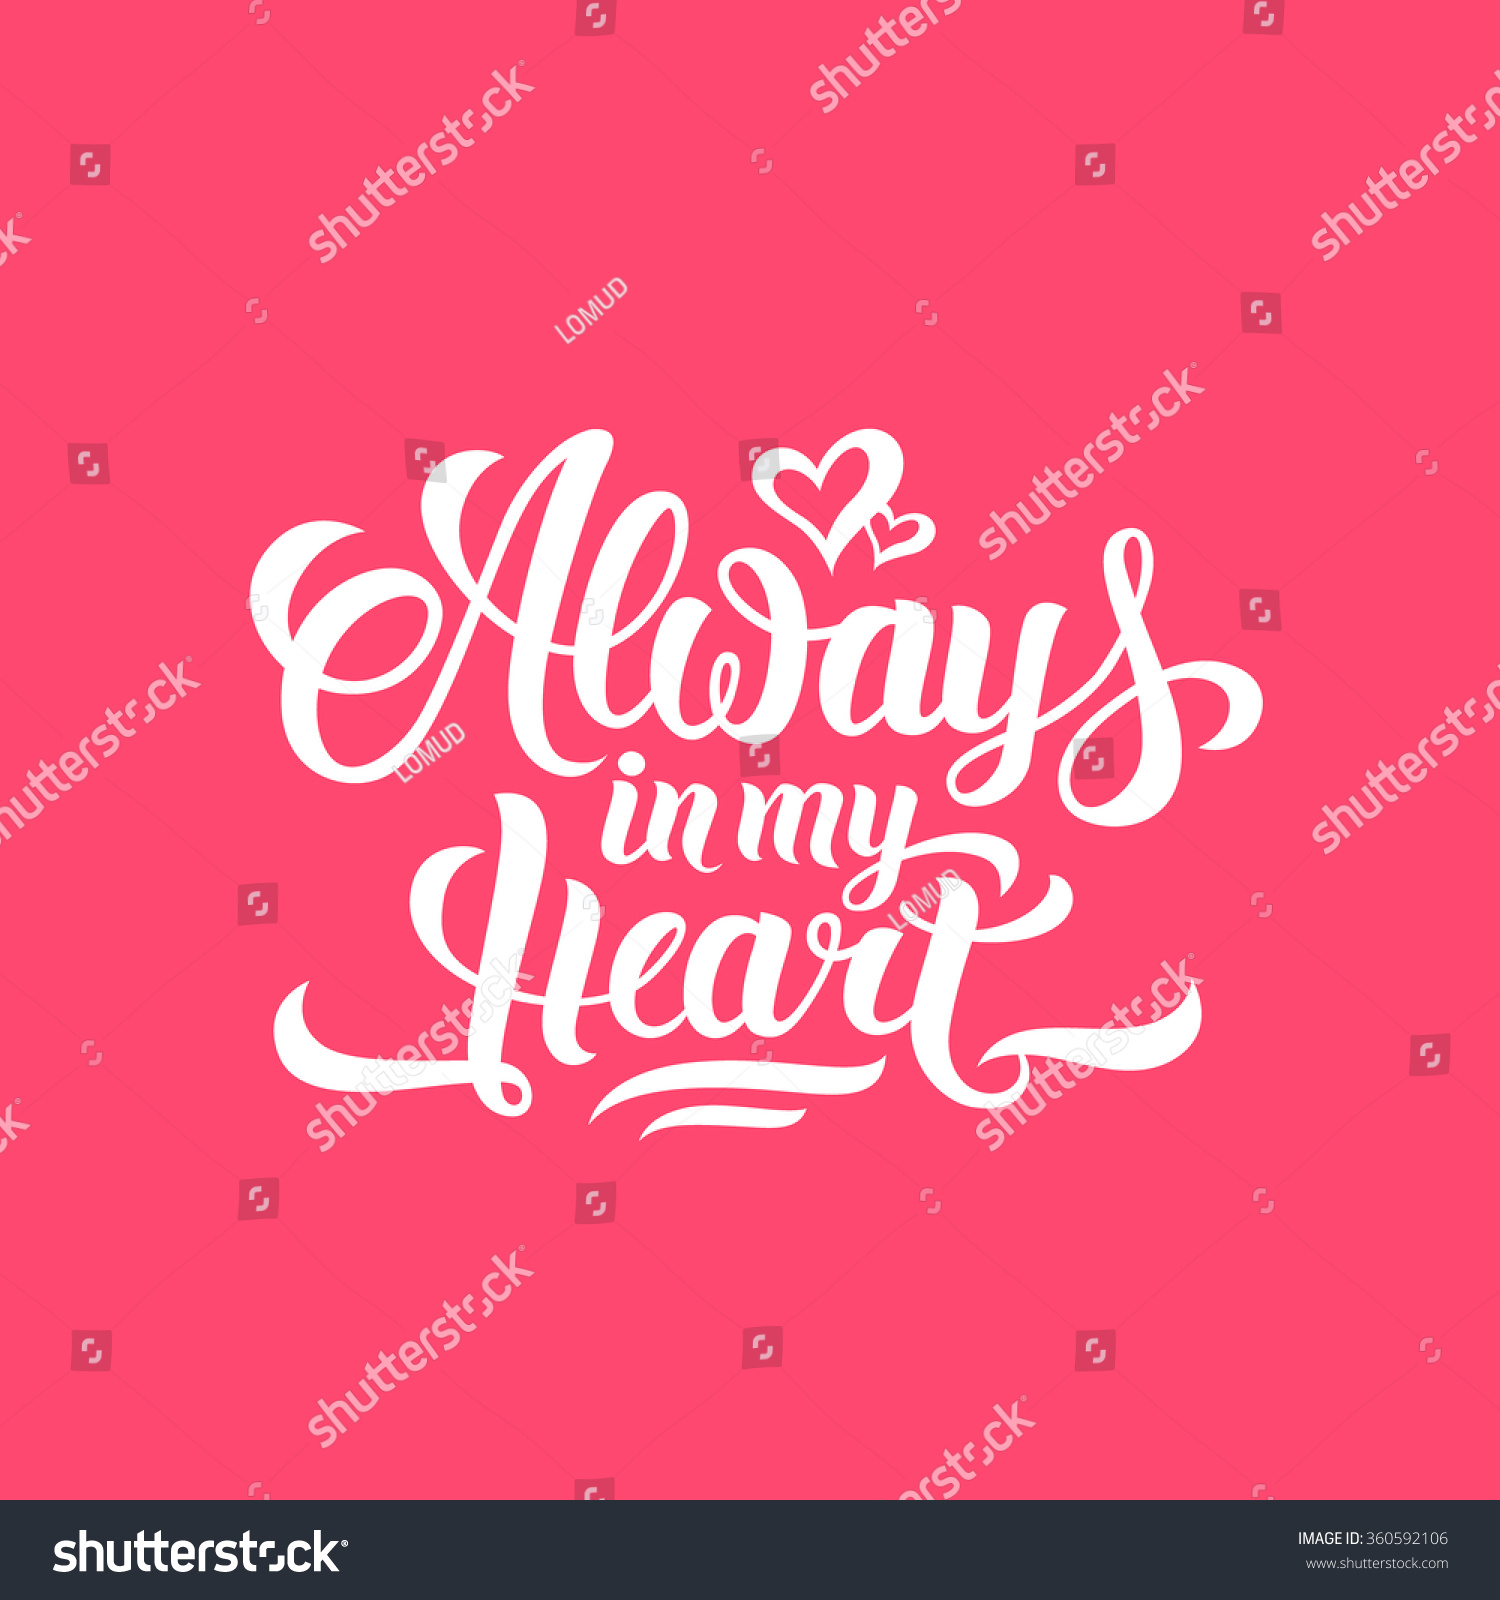 Always in my Heart hand lettering on pink background illustration. Handmade calligraphy for print, card, invitation #360592106